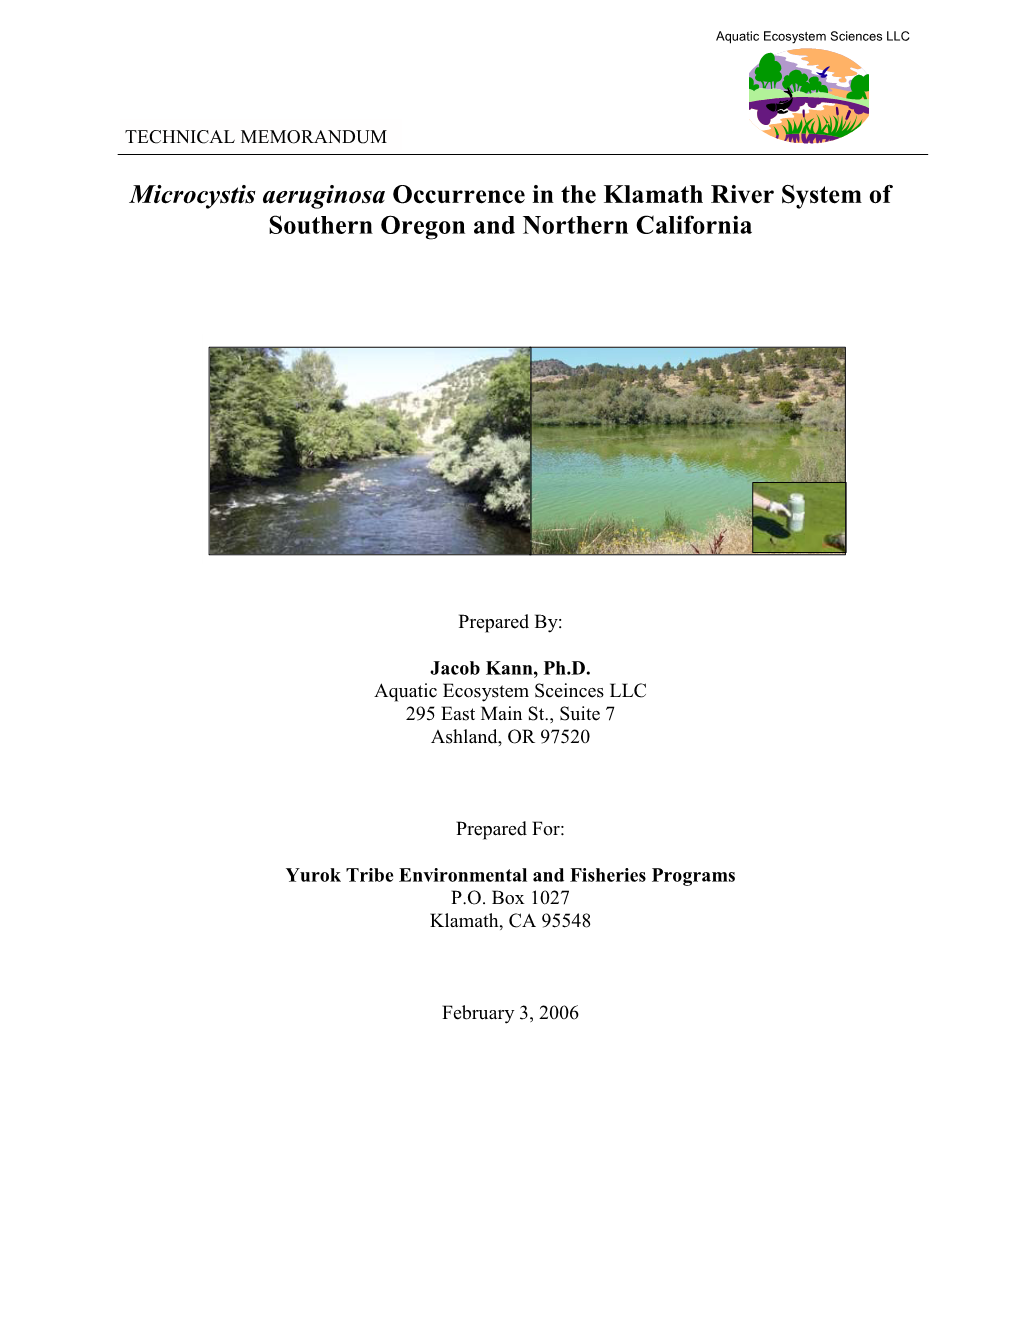 Microcystis Aeruginosa Occurrence in the Klamath River System of Southern Oregon and Northern California